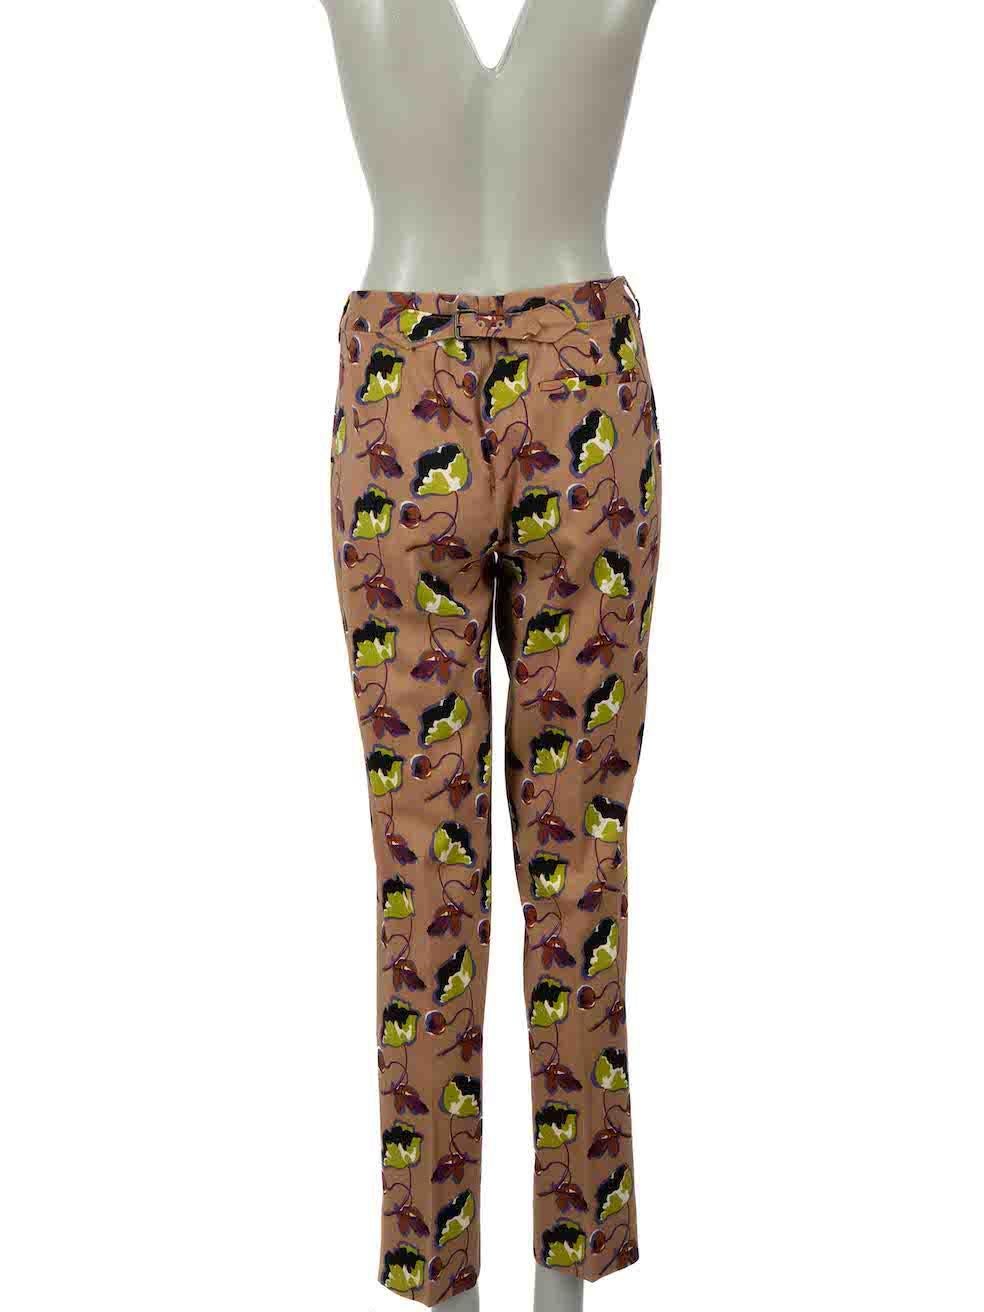 Miu Miu Brown Wool Floral Print Slim Leg Trousers Size L In Excellent Condition For Sale In London, GB